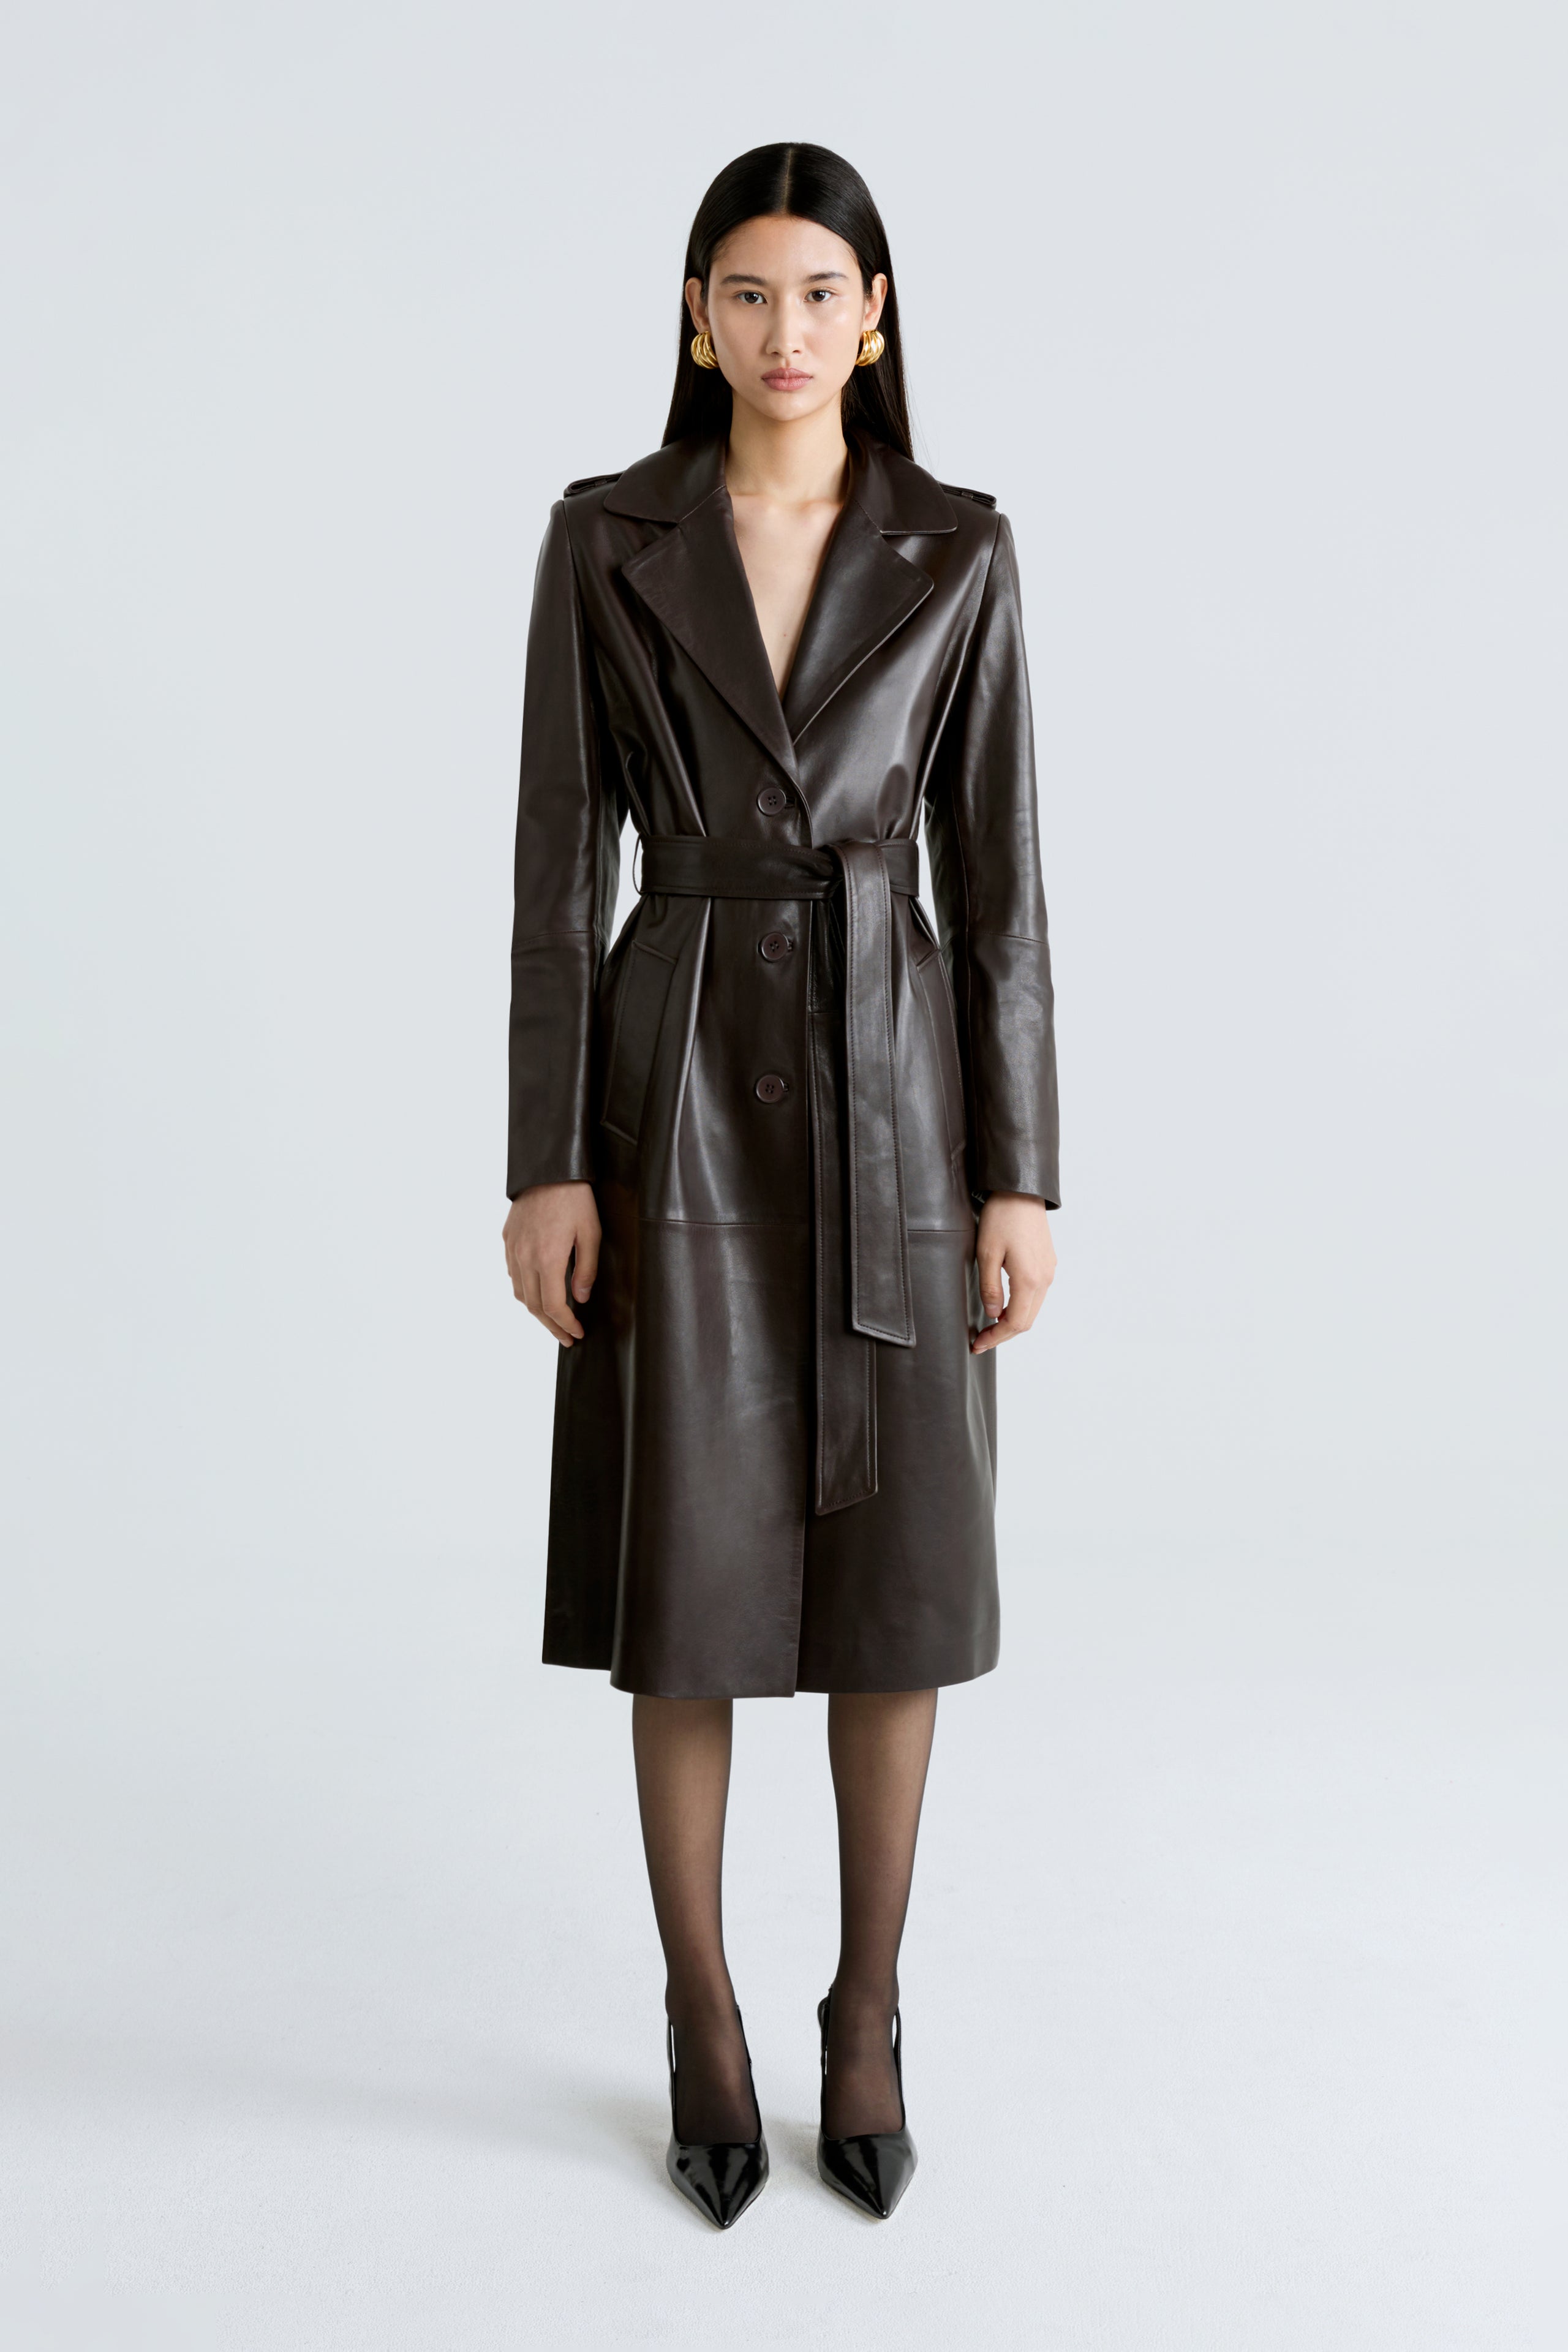 Model is wearing the Marla Chocolat Fondant/Espresso Belted Leather Coat Front